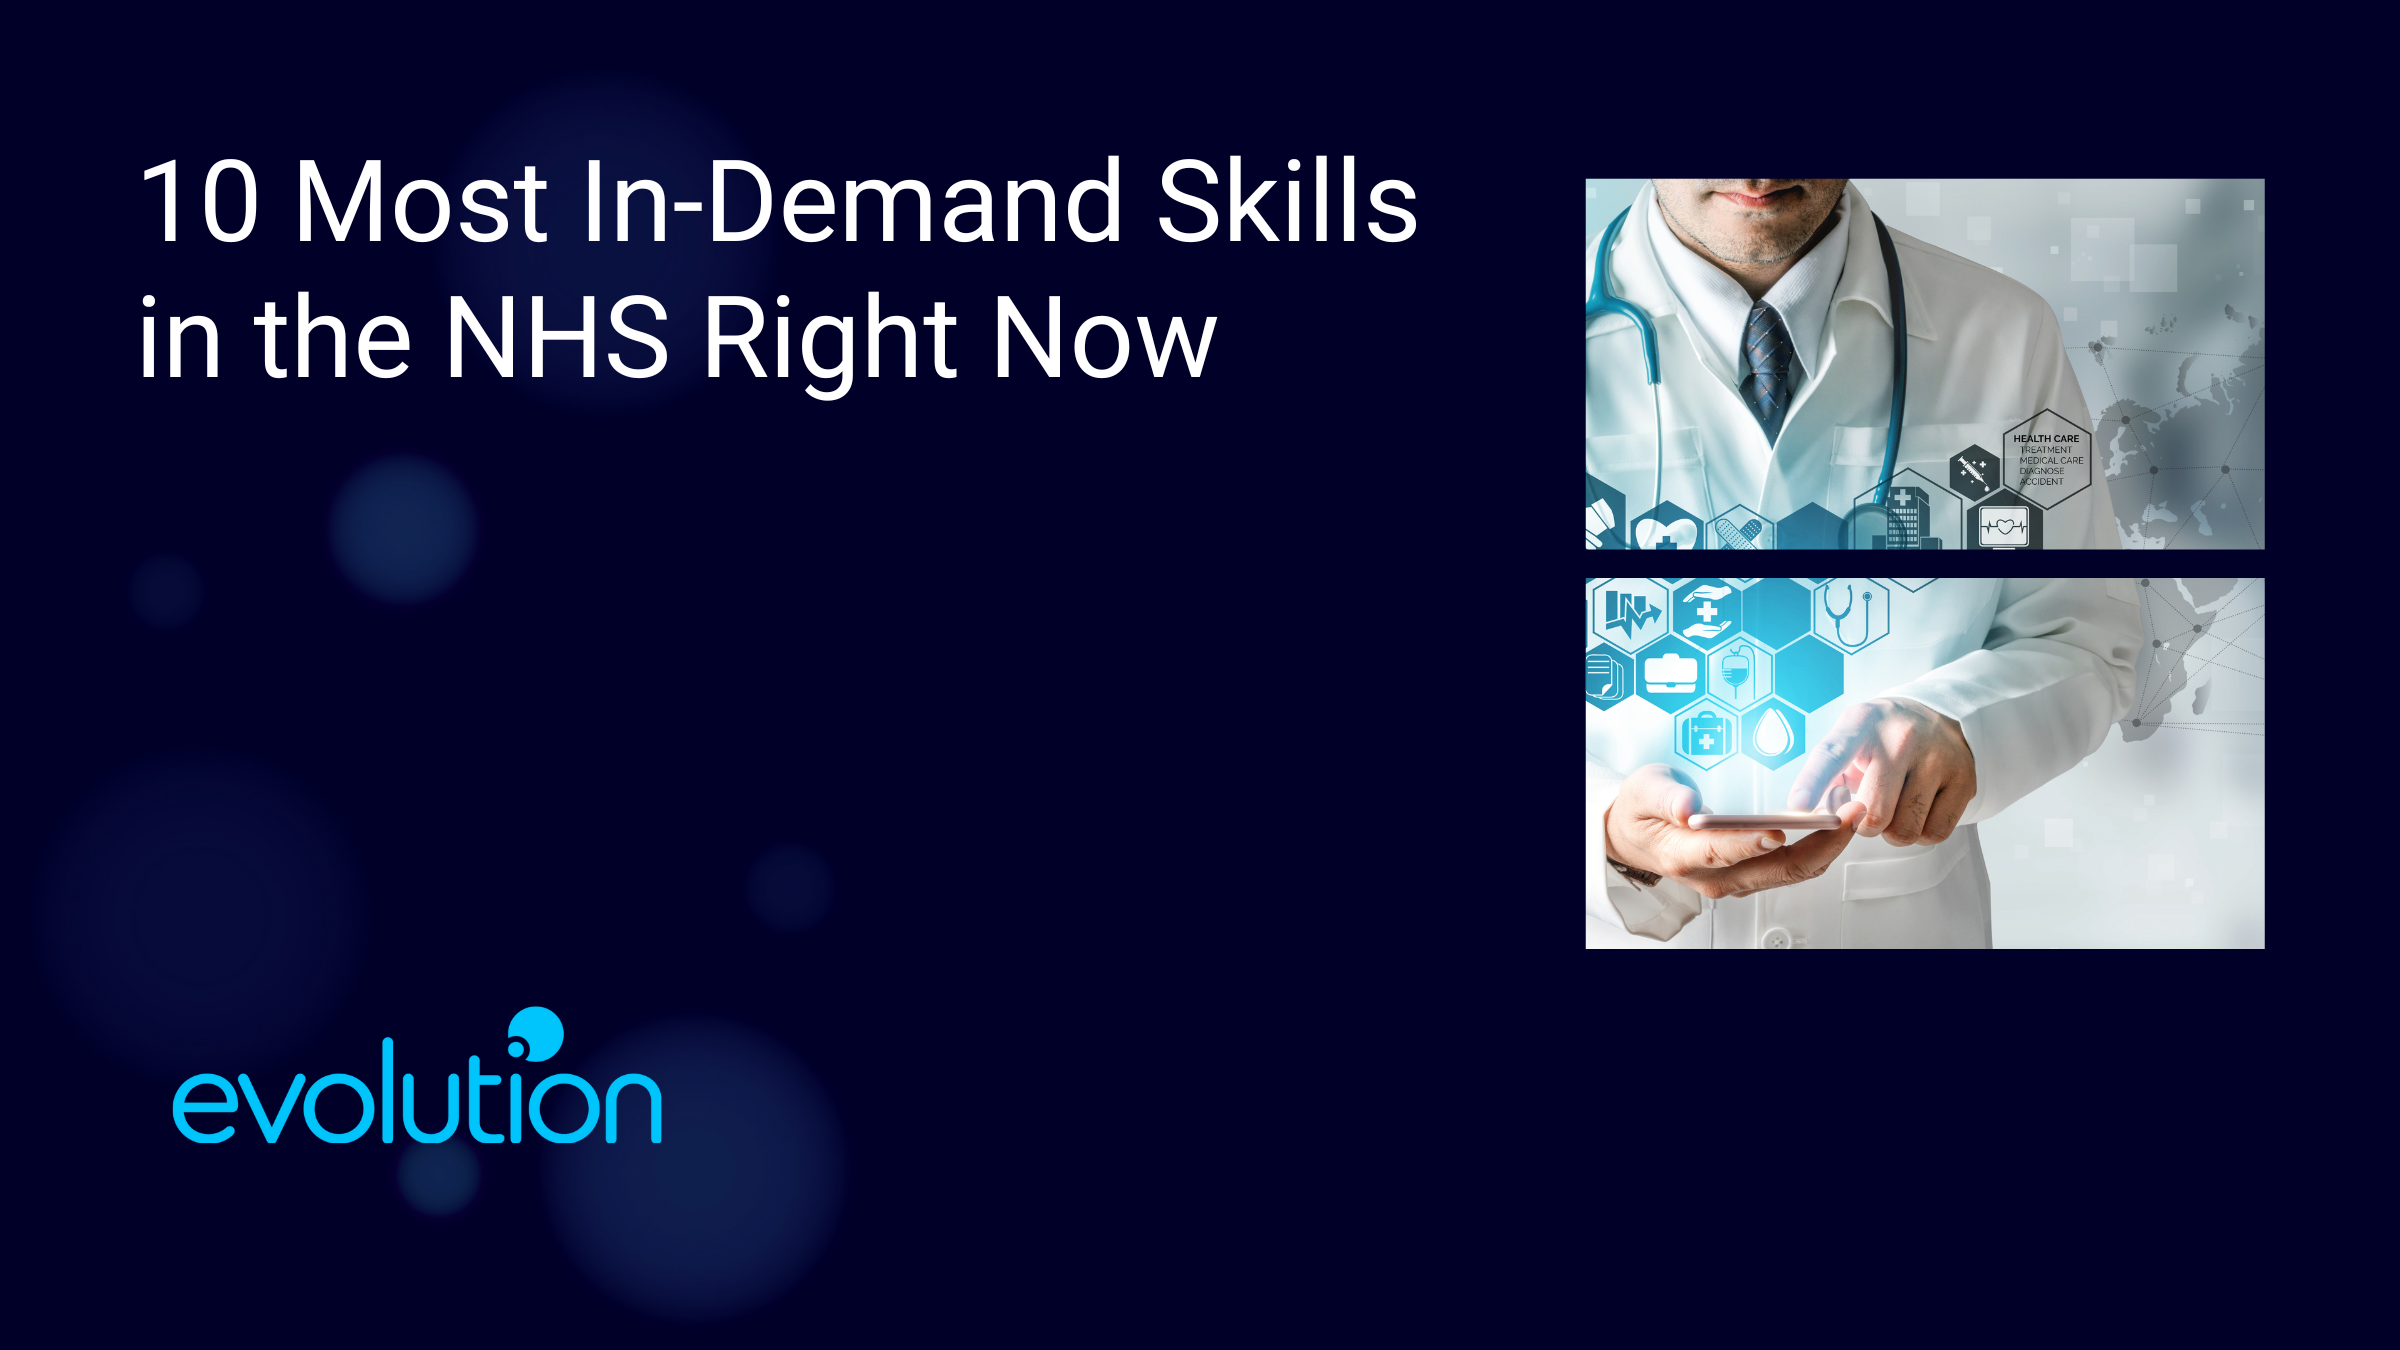 10 Most In-Demand Skills in the NHS Right Now